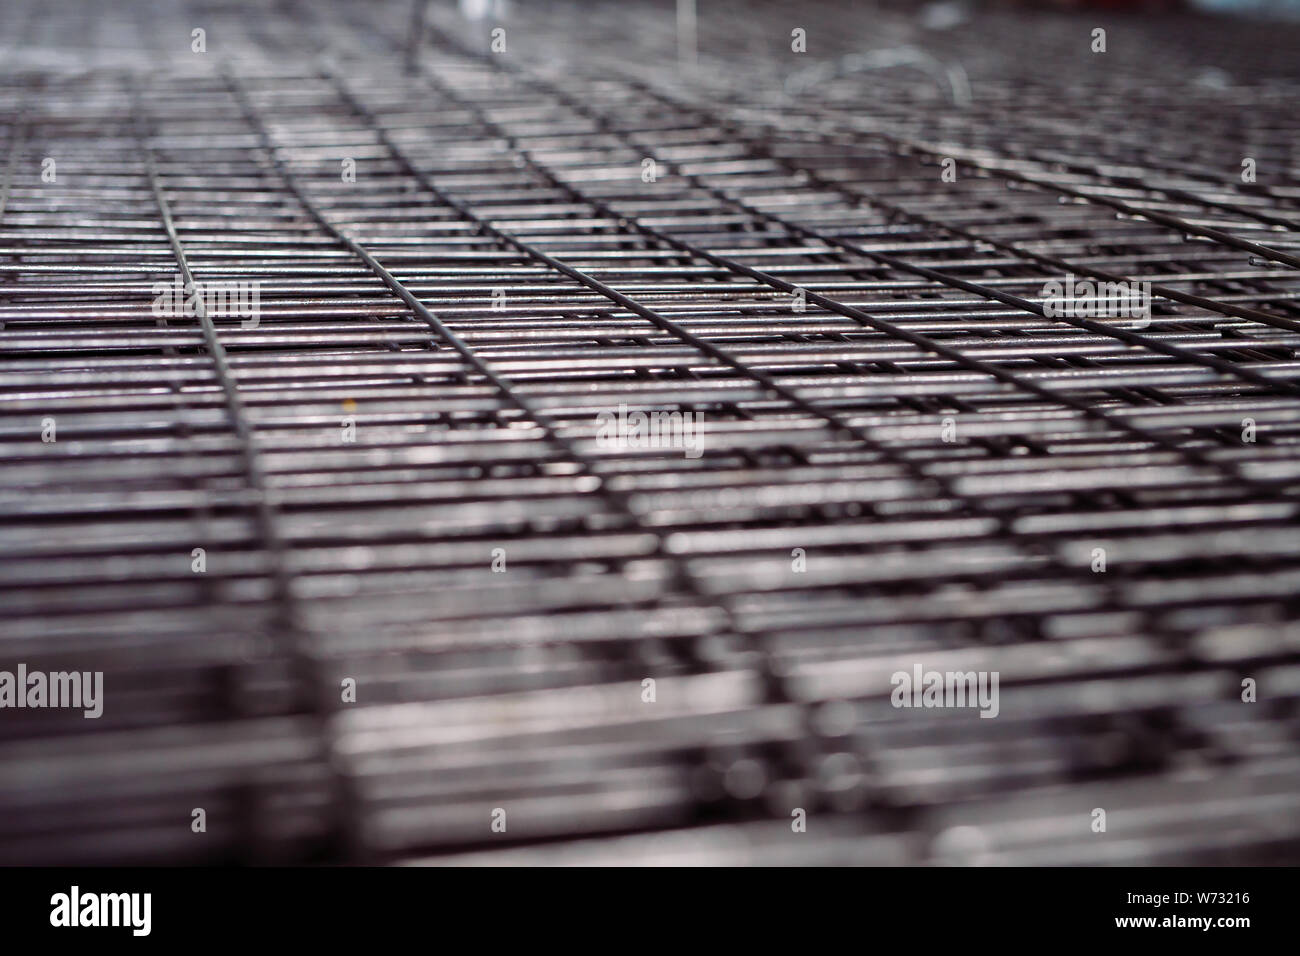 Metal grid. Heavy industry production. Metal rolling plant Stock Photo